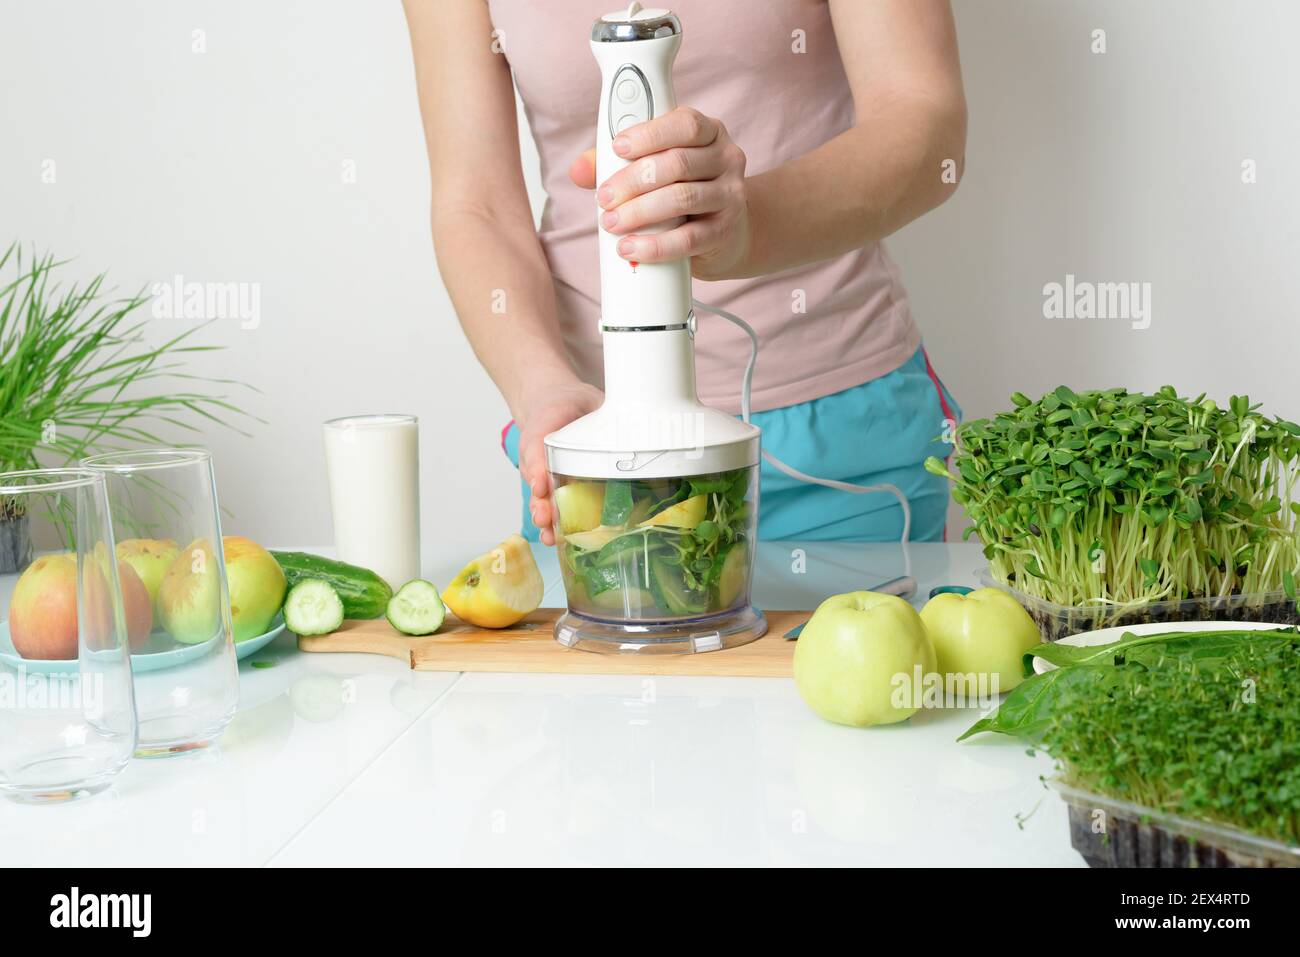 step-by-step recipe for making smoothies from micro-green apples cucumber and spinach. woman hands cut vegetables and put them in blender for whipping Stock Photo